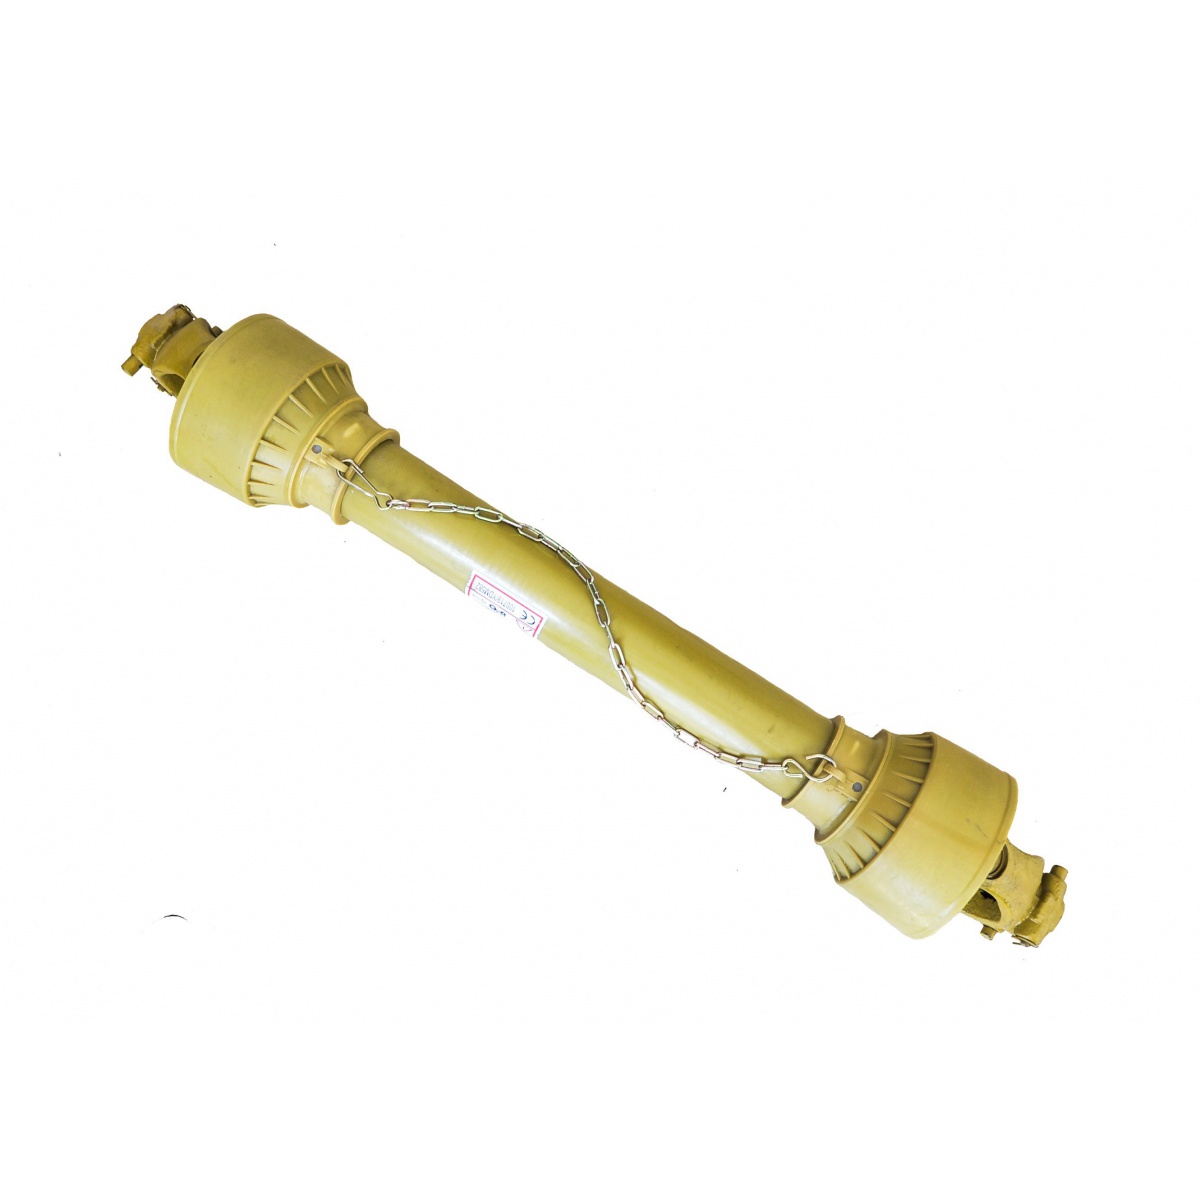 PTO shaft 07B - 200 cm / up to 105 HP